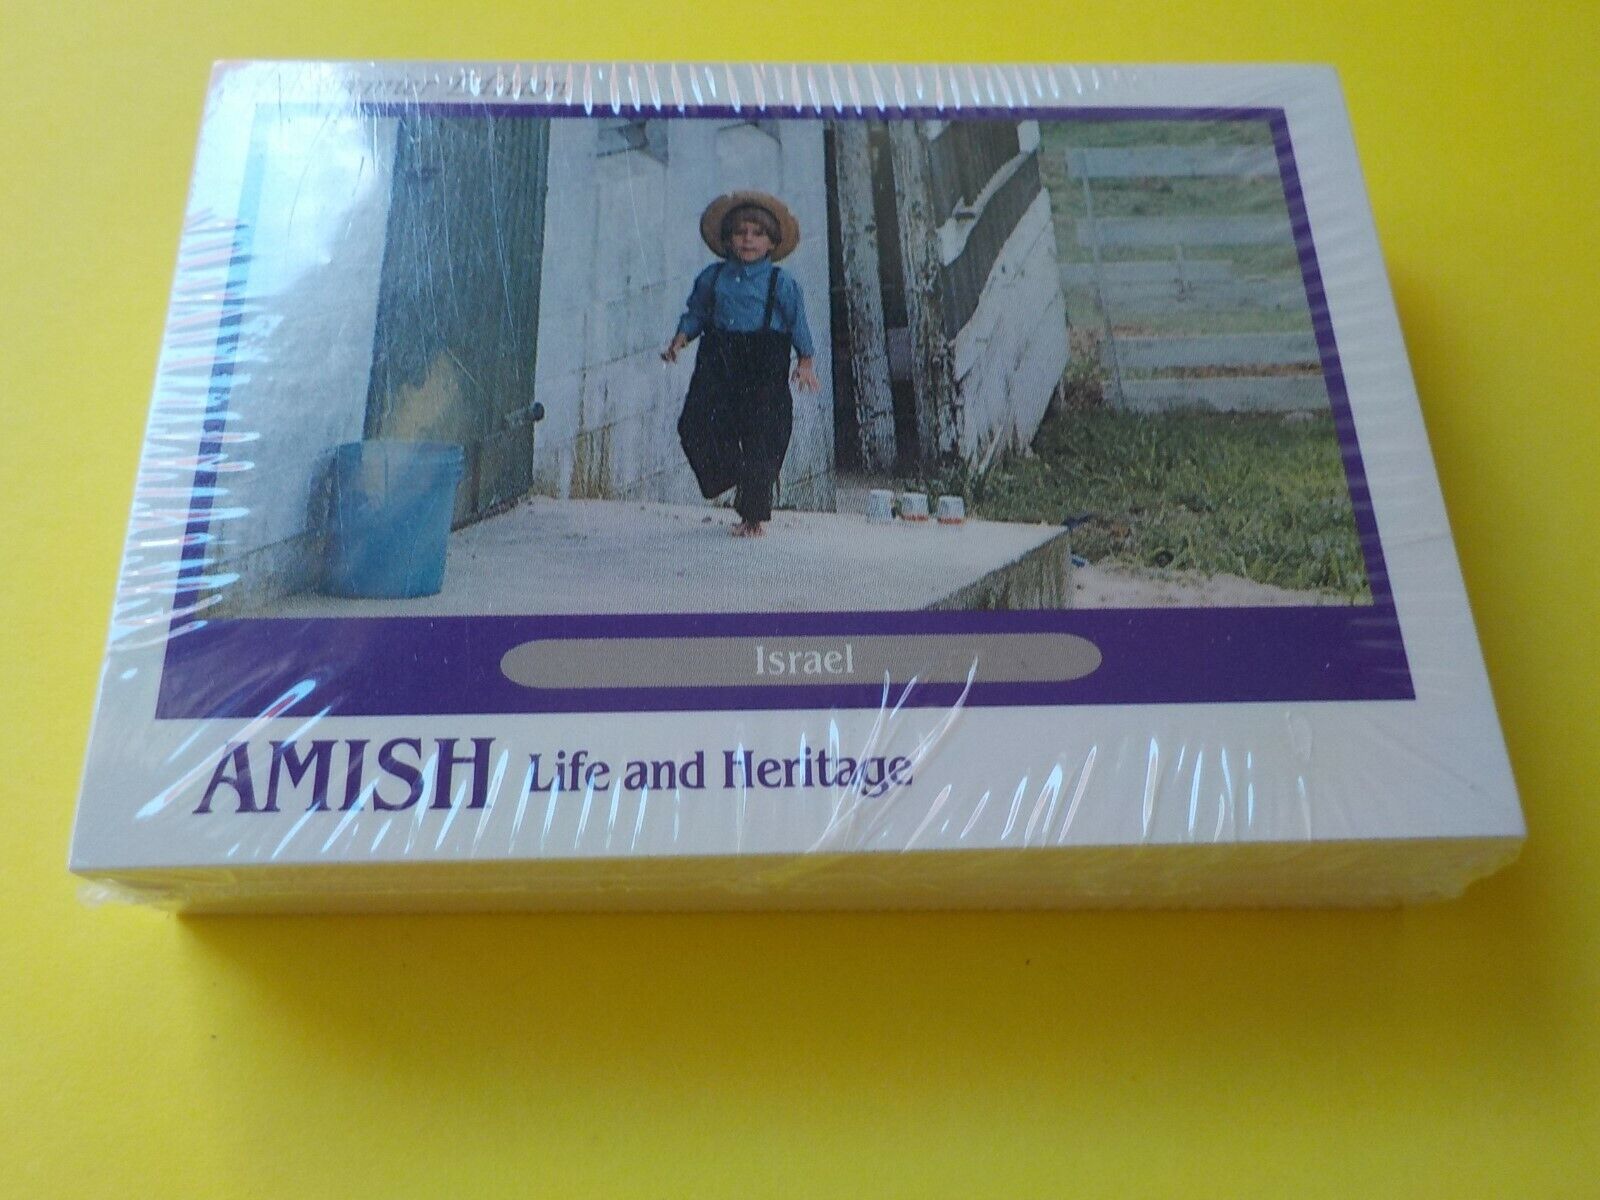 AMISH LIFE AND HERITAGE - PREMIER EDITION  #566 - BY GNM SPORTSCARDS